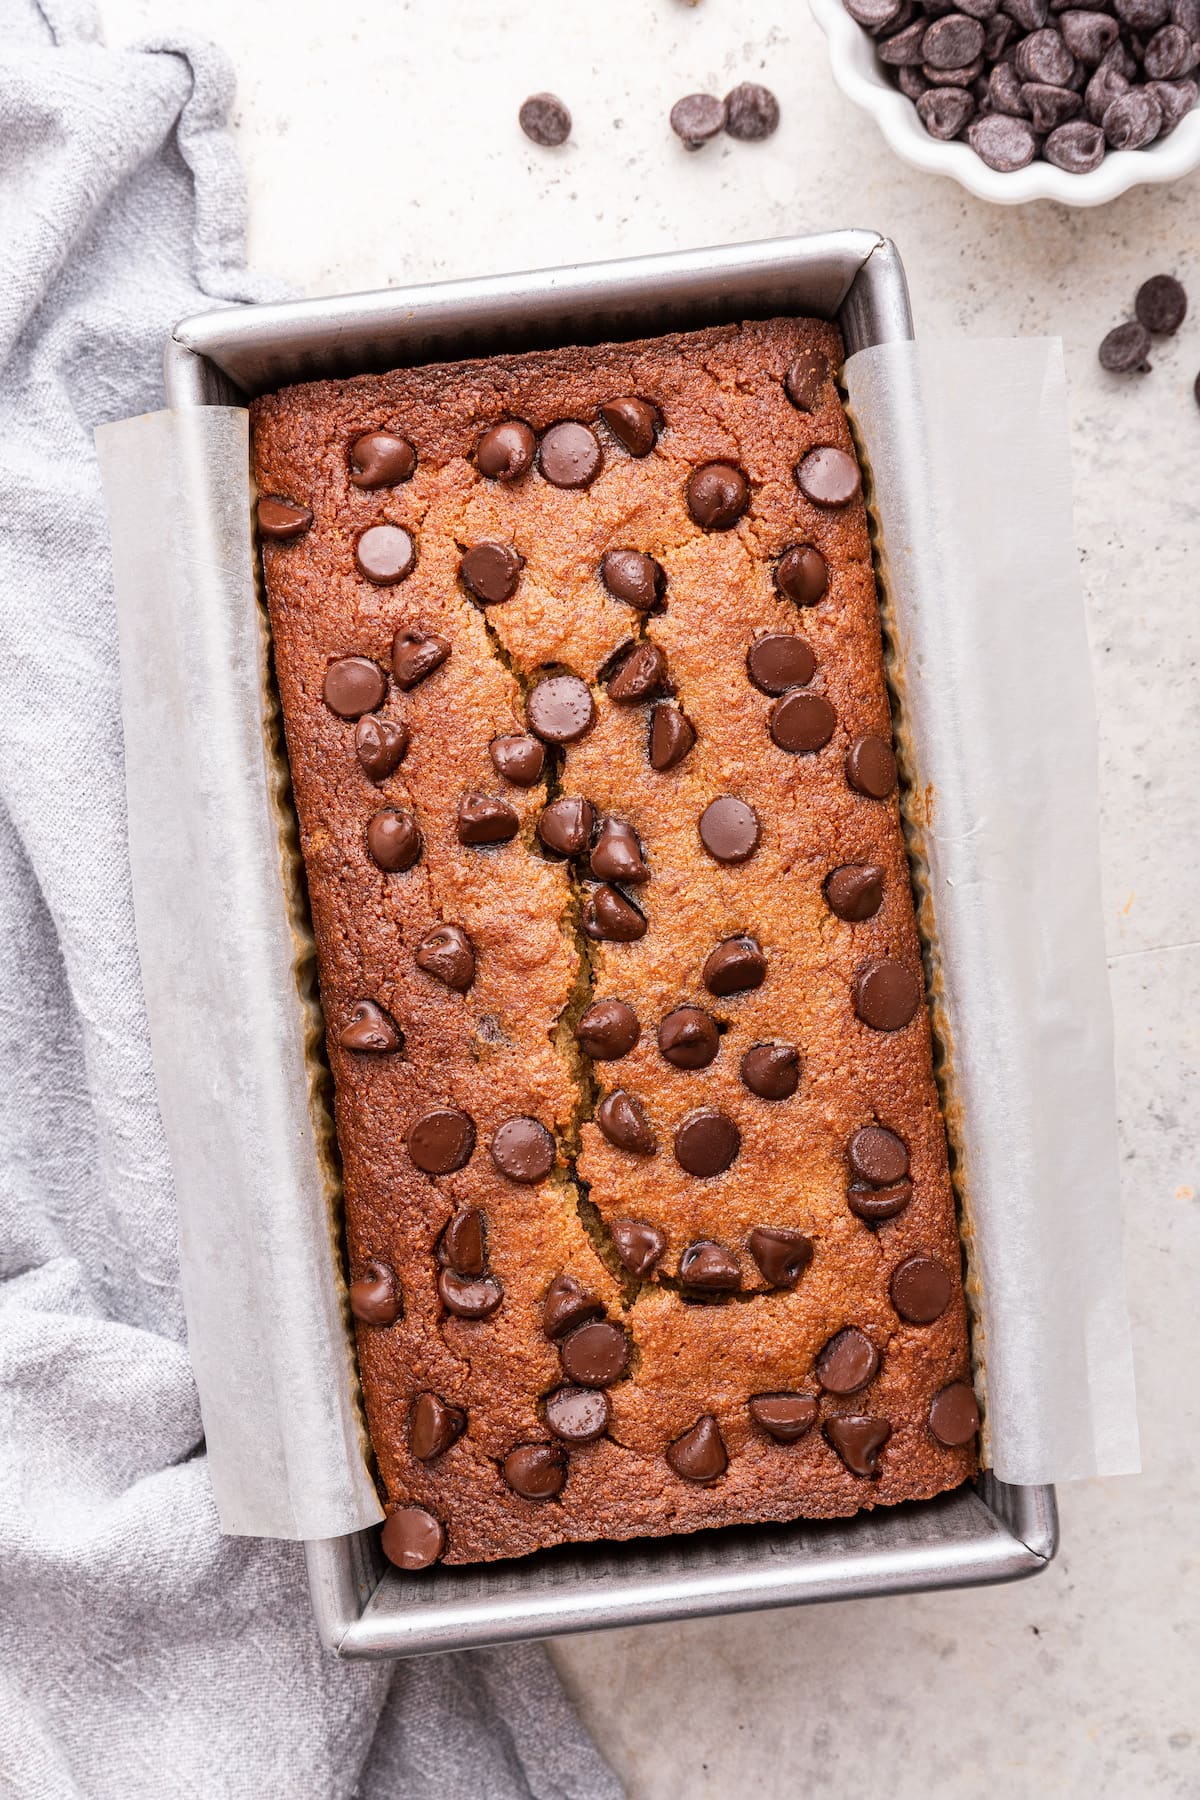 Almond flour banana bread with chocolate chips in a bread pan.